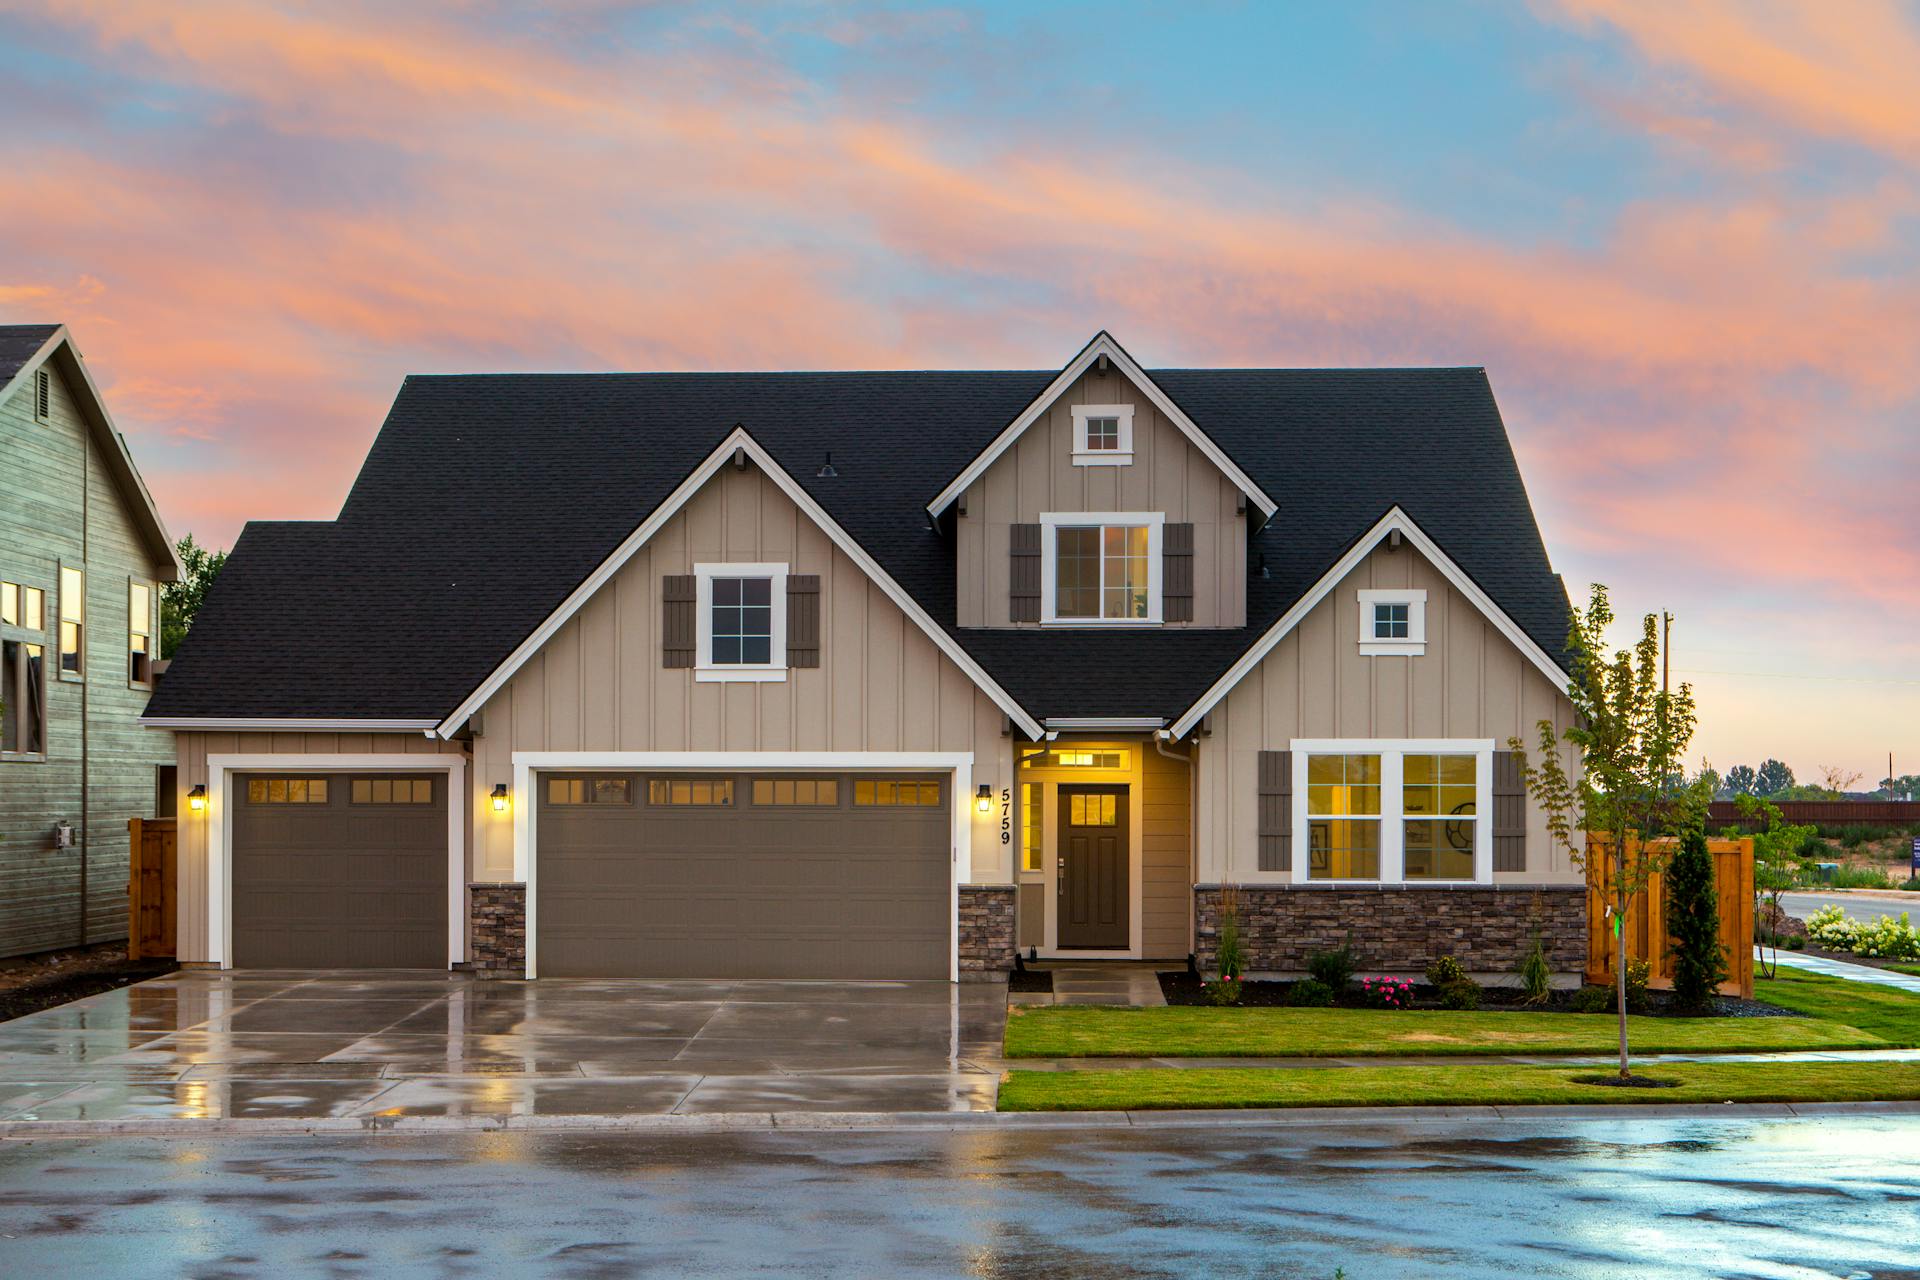 How a New Garage Door Can Make a Difference In Your Curb Appeal